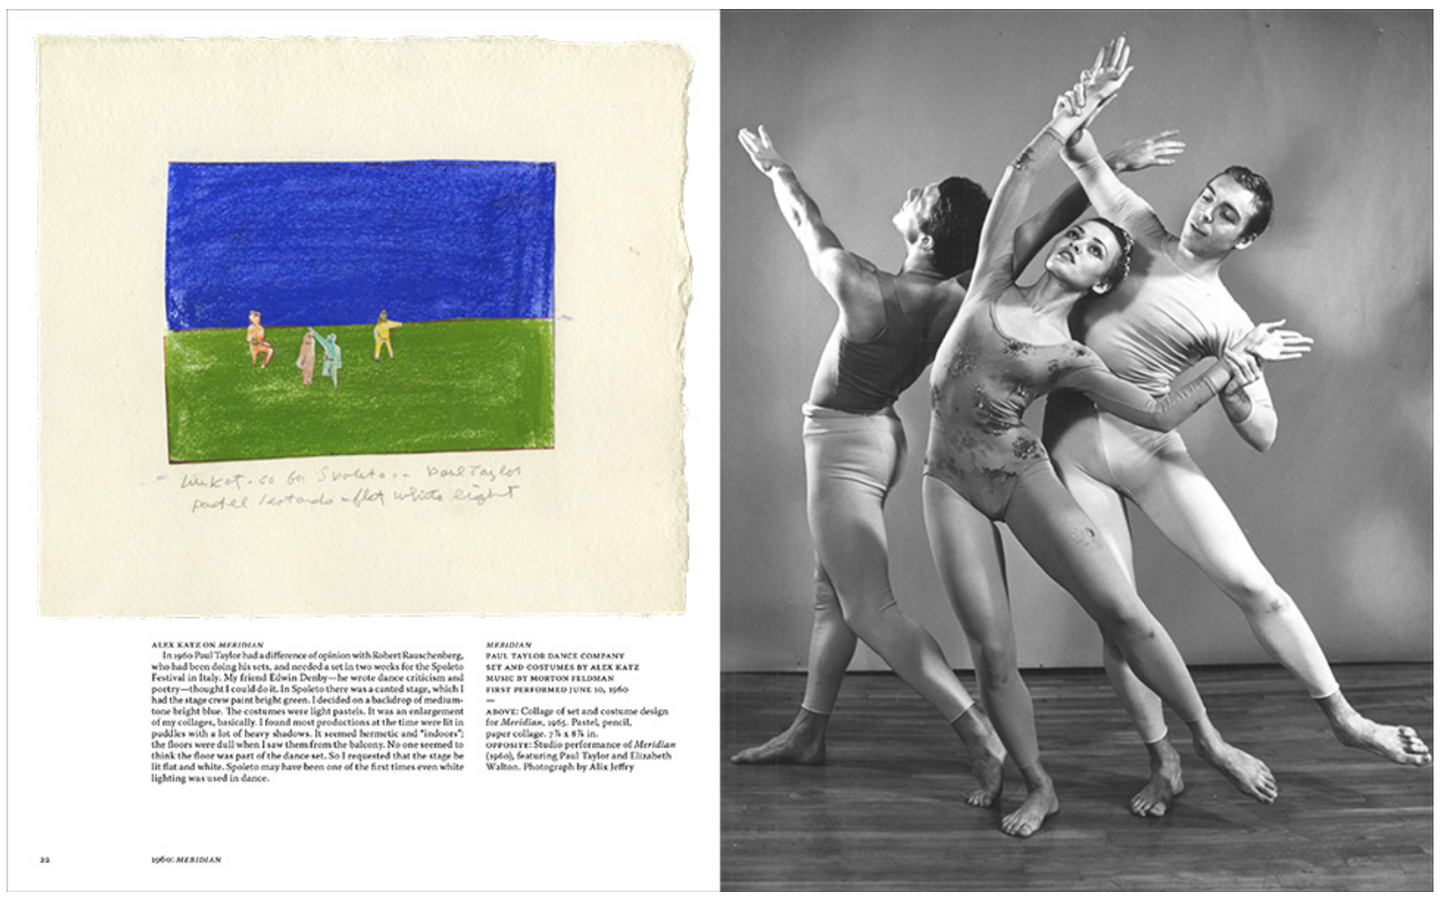 Page 22 from ‘Alex Katz: Theater & Dance’ featuring a drawing on the left page and a photograph of dancers on the right page.